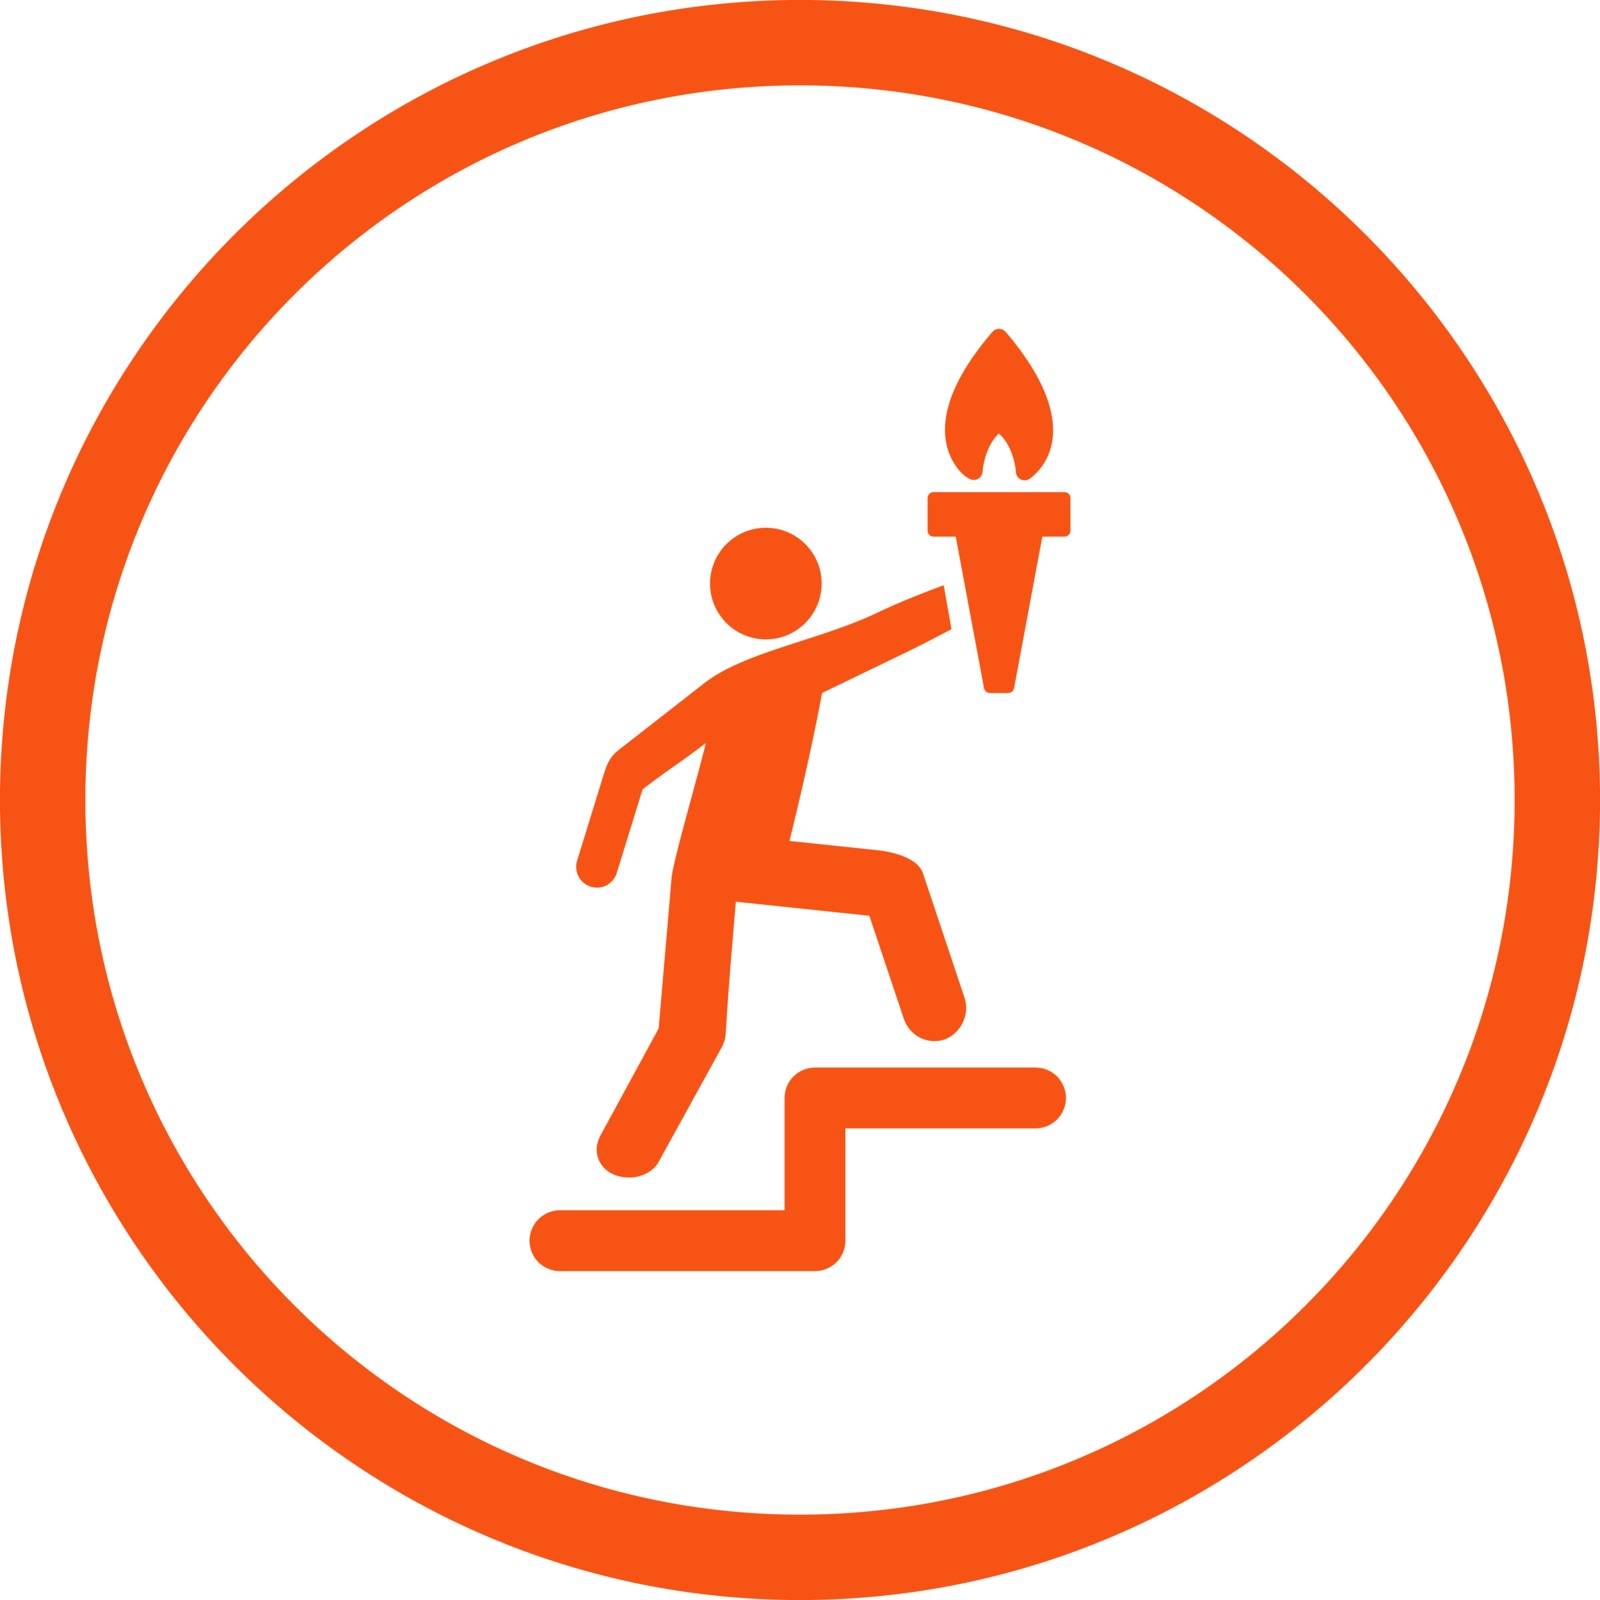 Leader vector icon. This rounded flat symbol is drawn with orange color on a white background.